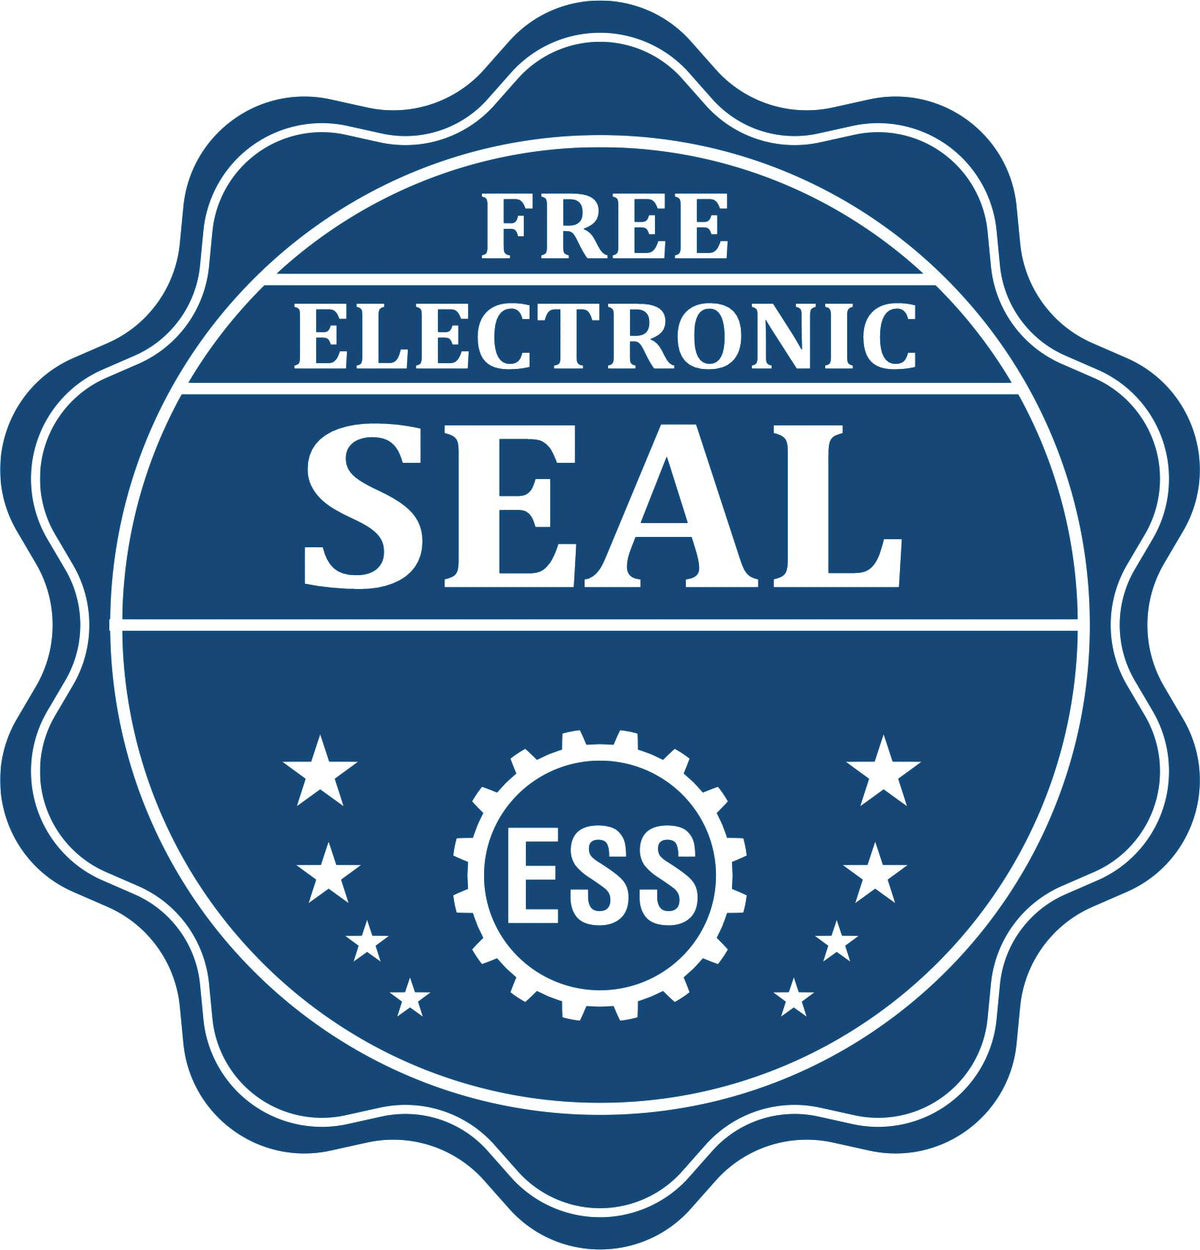 A badge showing a free electronic seal for the PSI Rhode Island Notary Stamp with stars and the ESS gear on the emblem.